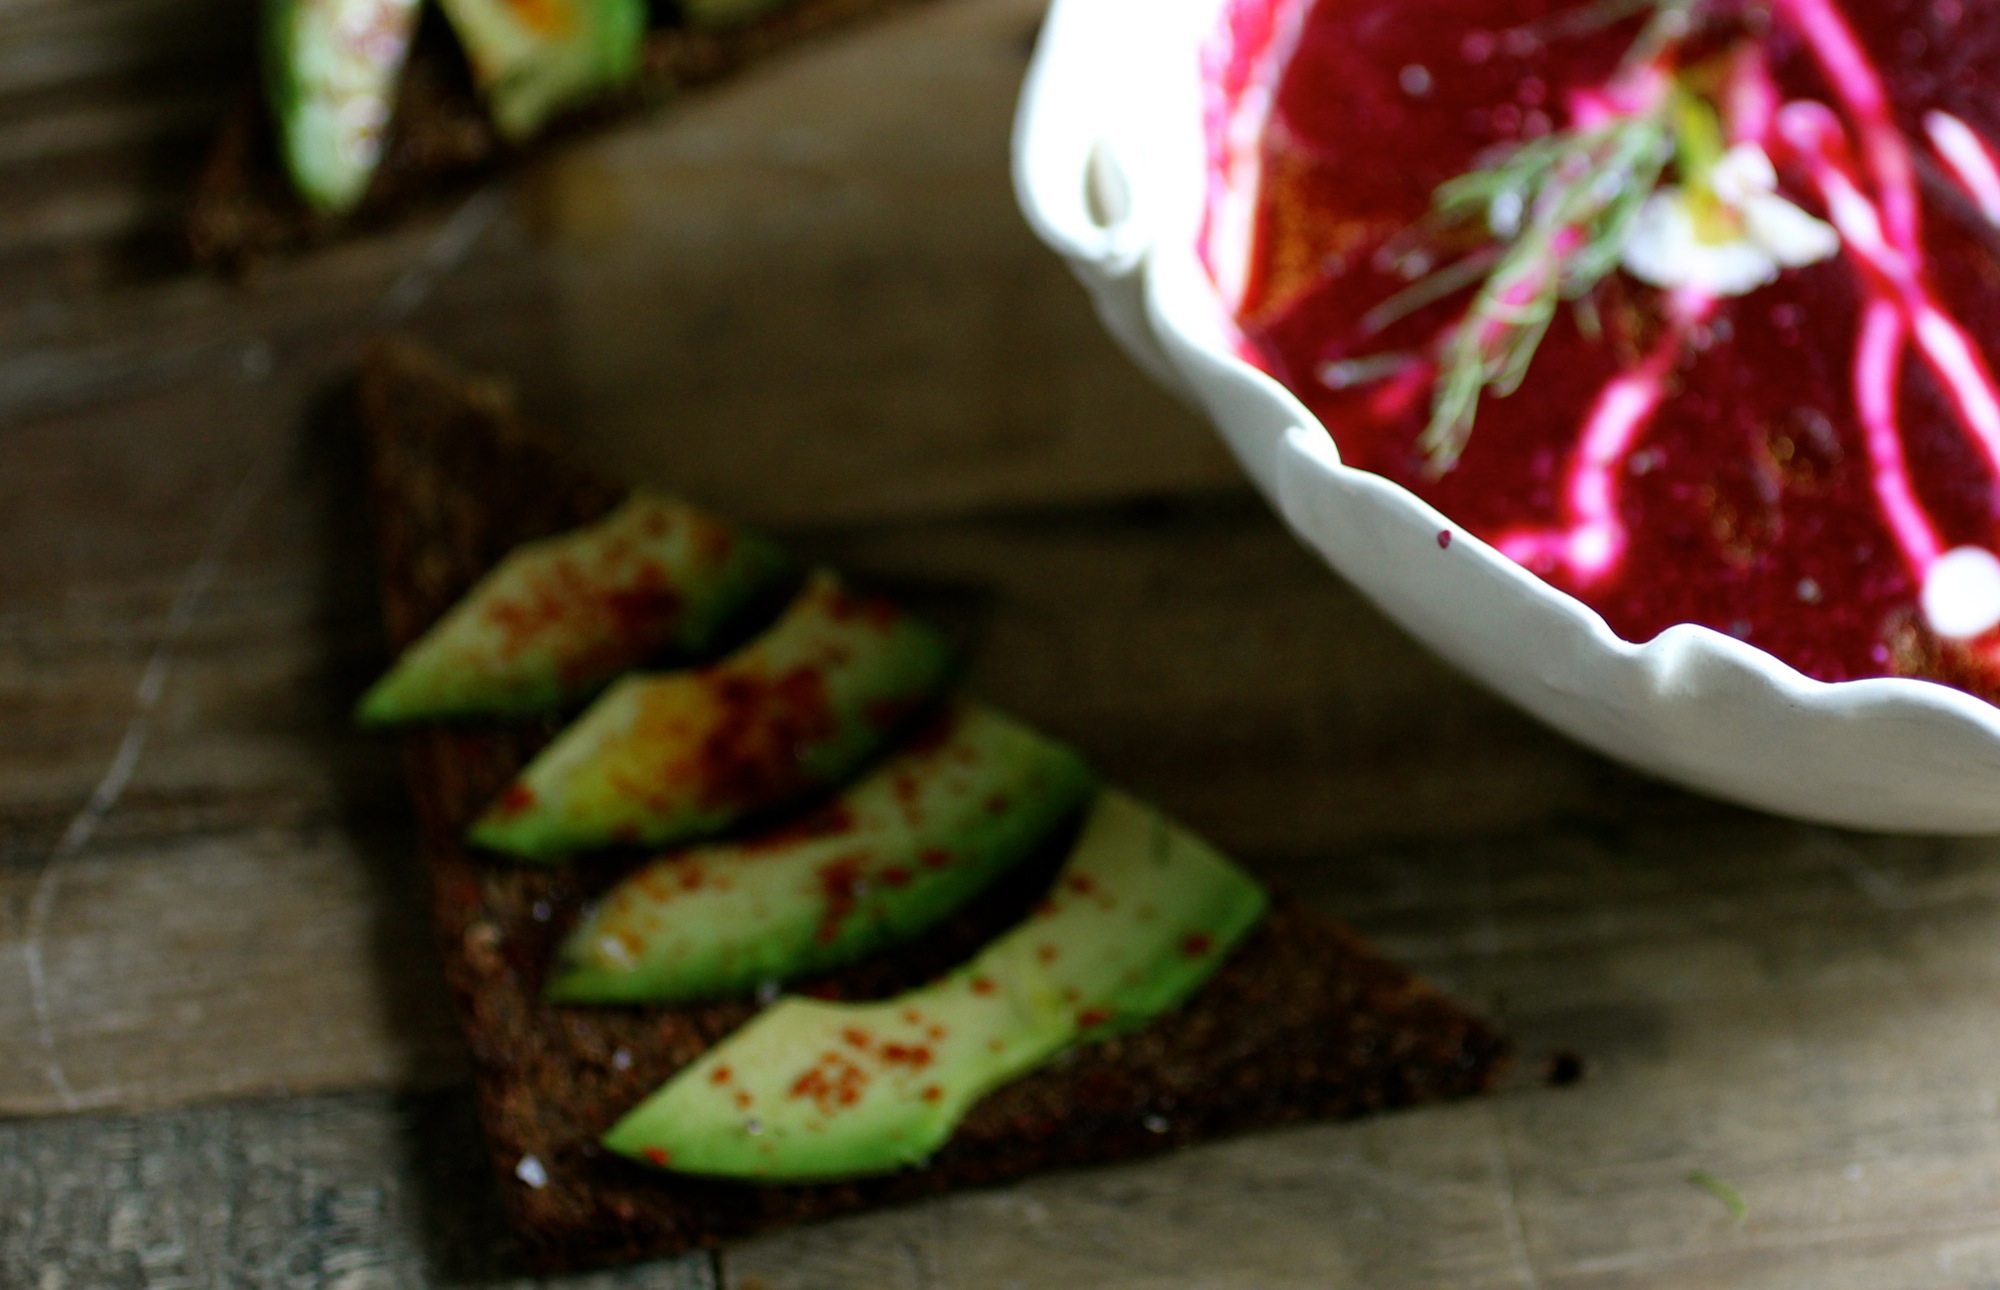 Borscht is great paired with avocado rye toast dusted with smoked paprika.